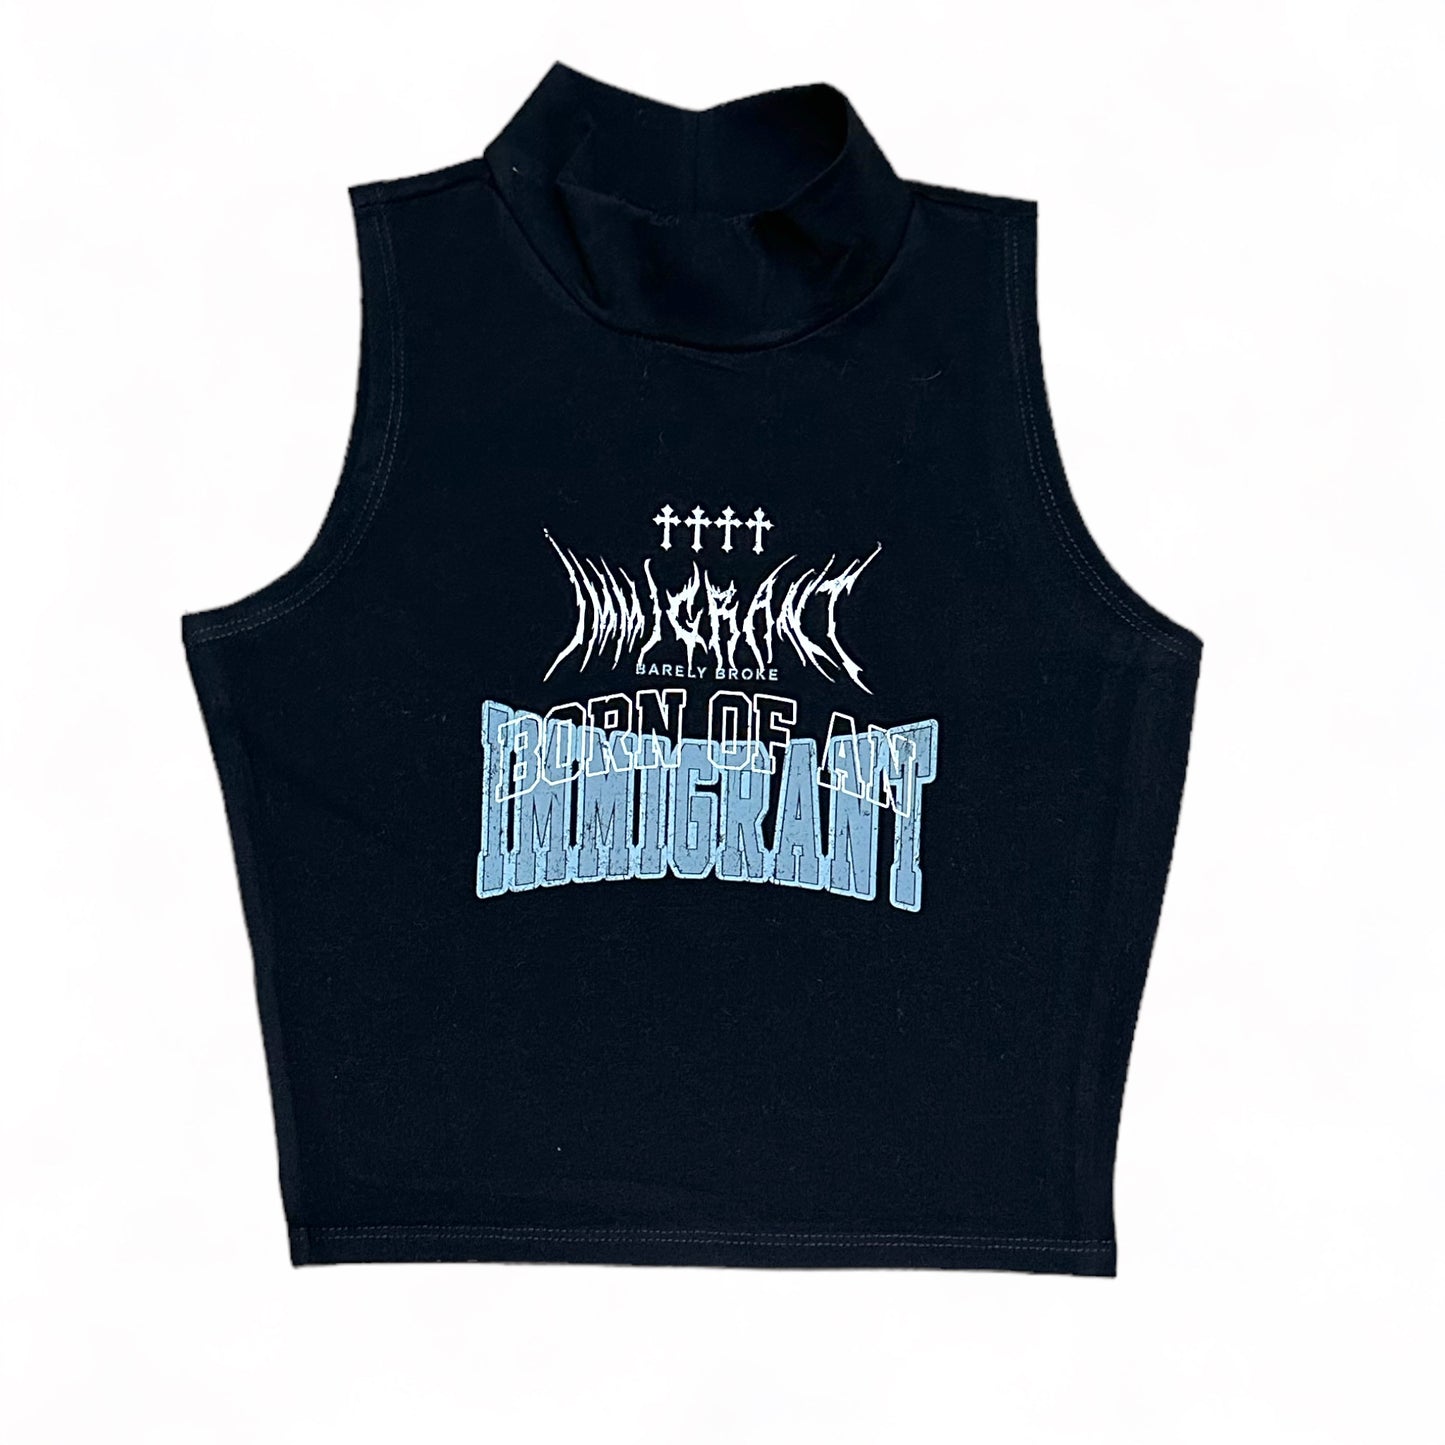 BORN OF AN IMMIGRANT LAST CHAPTER MOCK NECK - BLACK